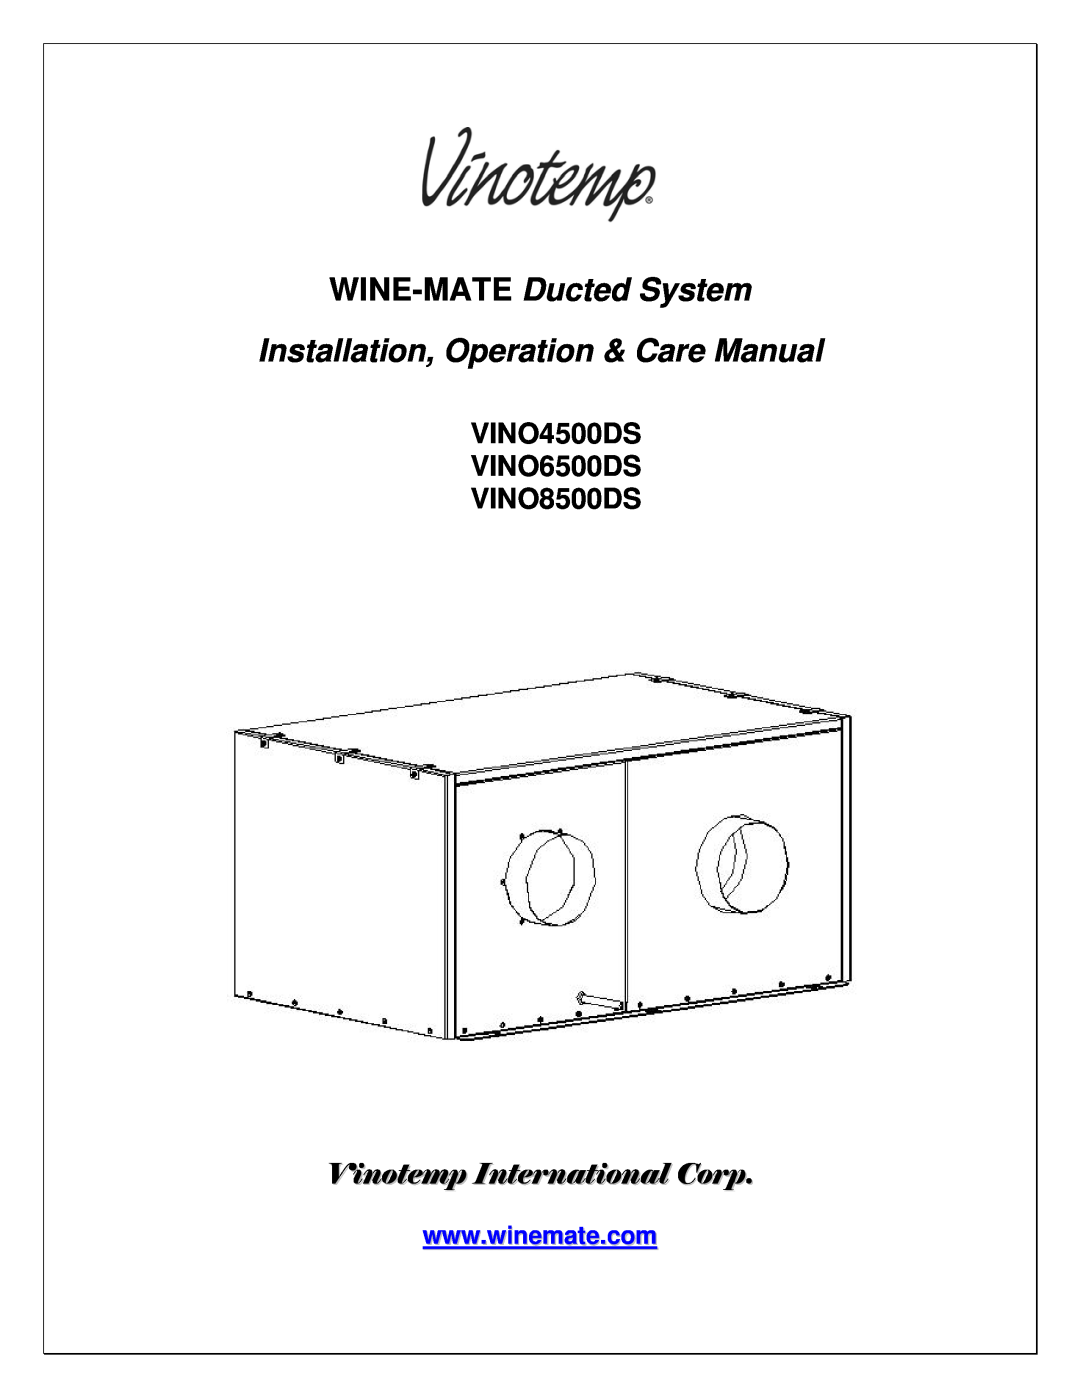 Vinotemp VINO8500DS manual WINE-MATE Ducted System, Installation, Operation & Care Manual, Vinotemp International Corp 